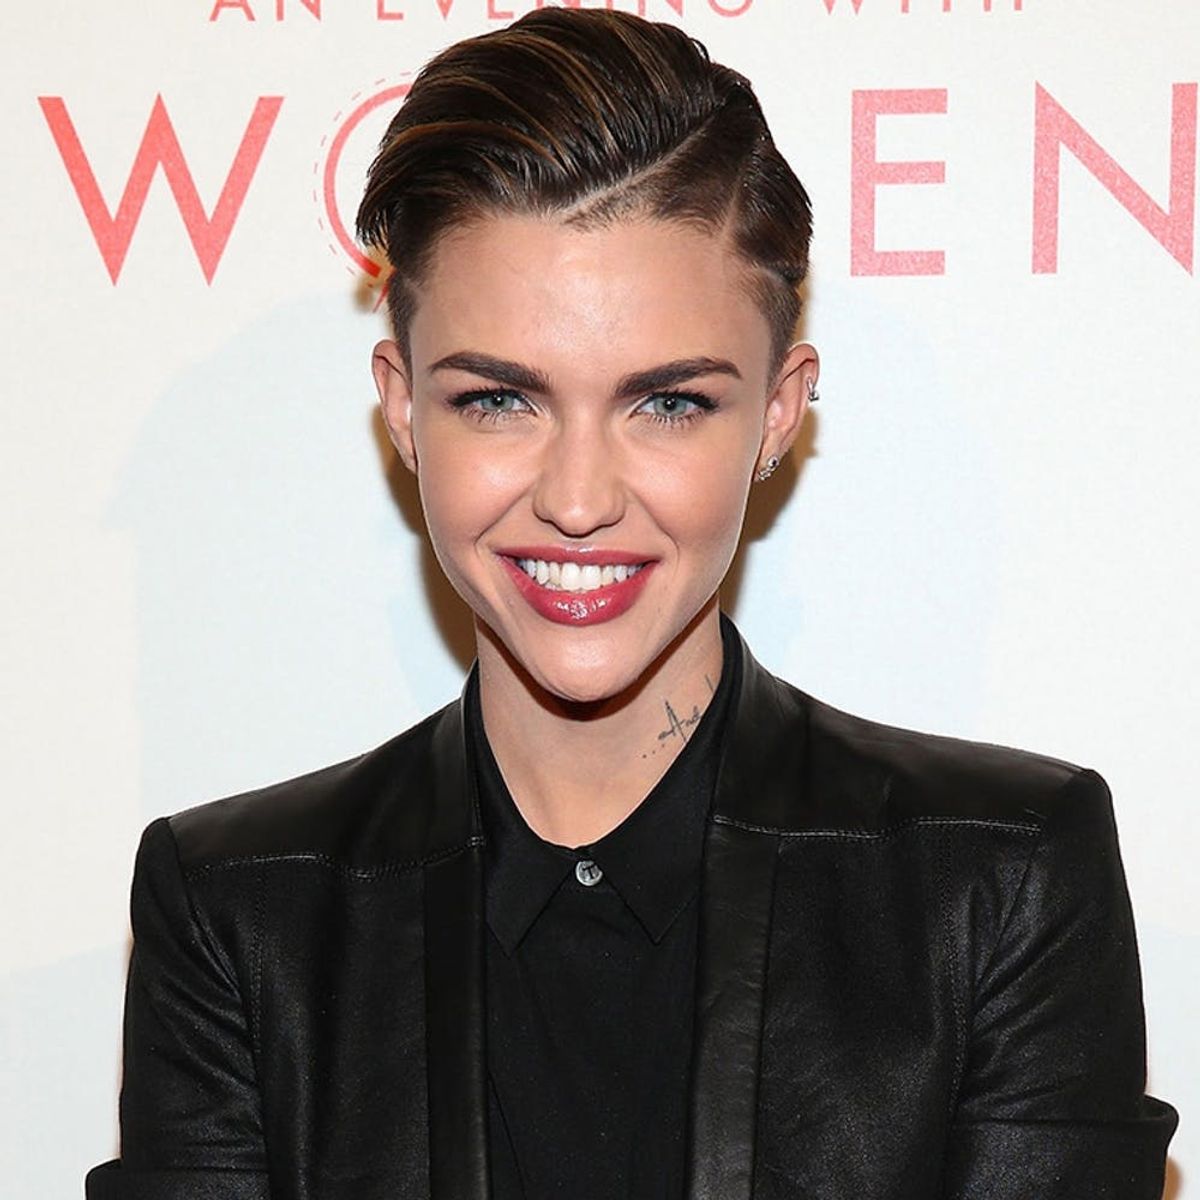 6 Pixie Cuts That Will Make You Look Just as Cool as Ruby Rose